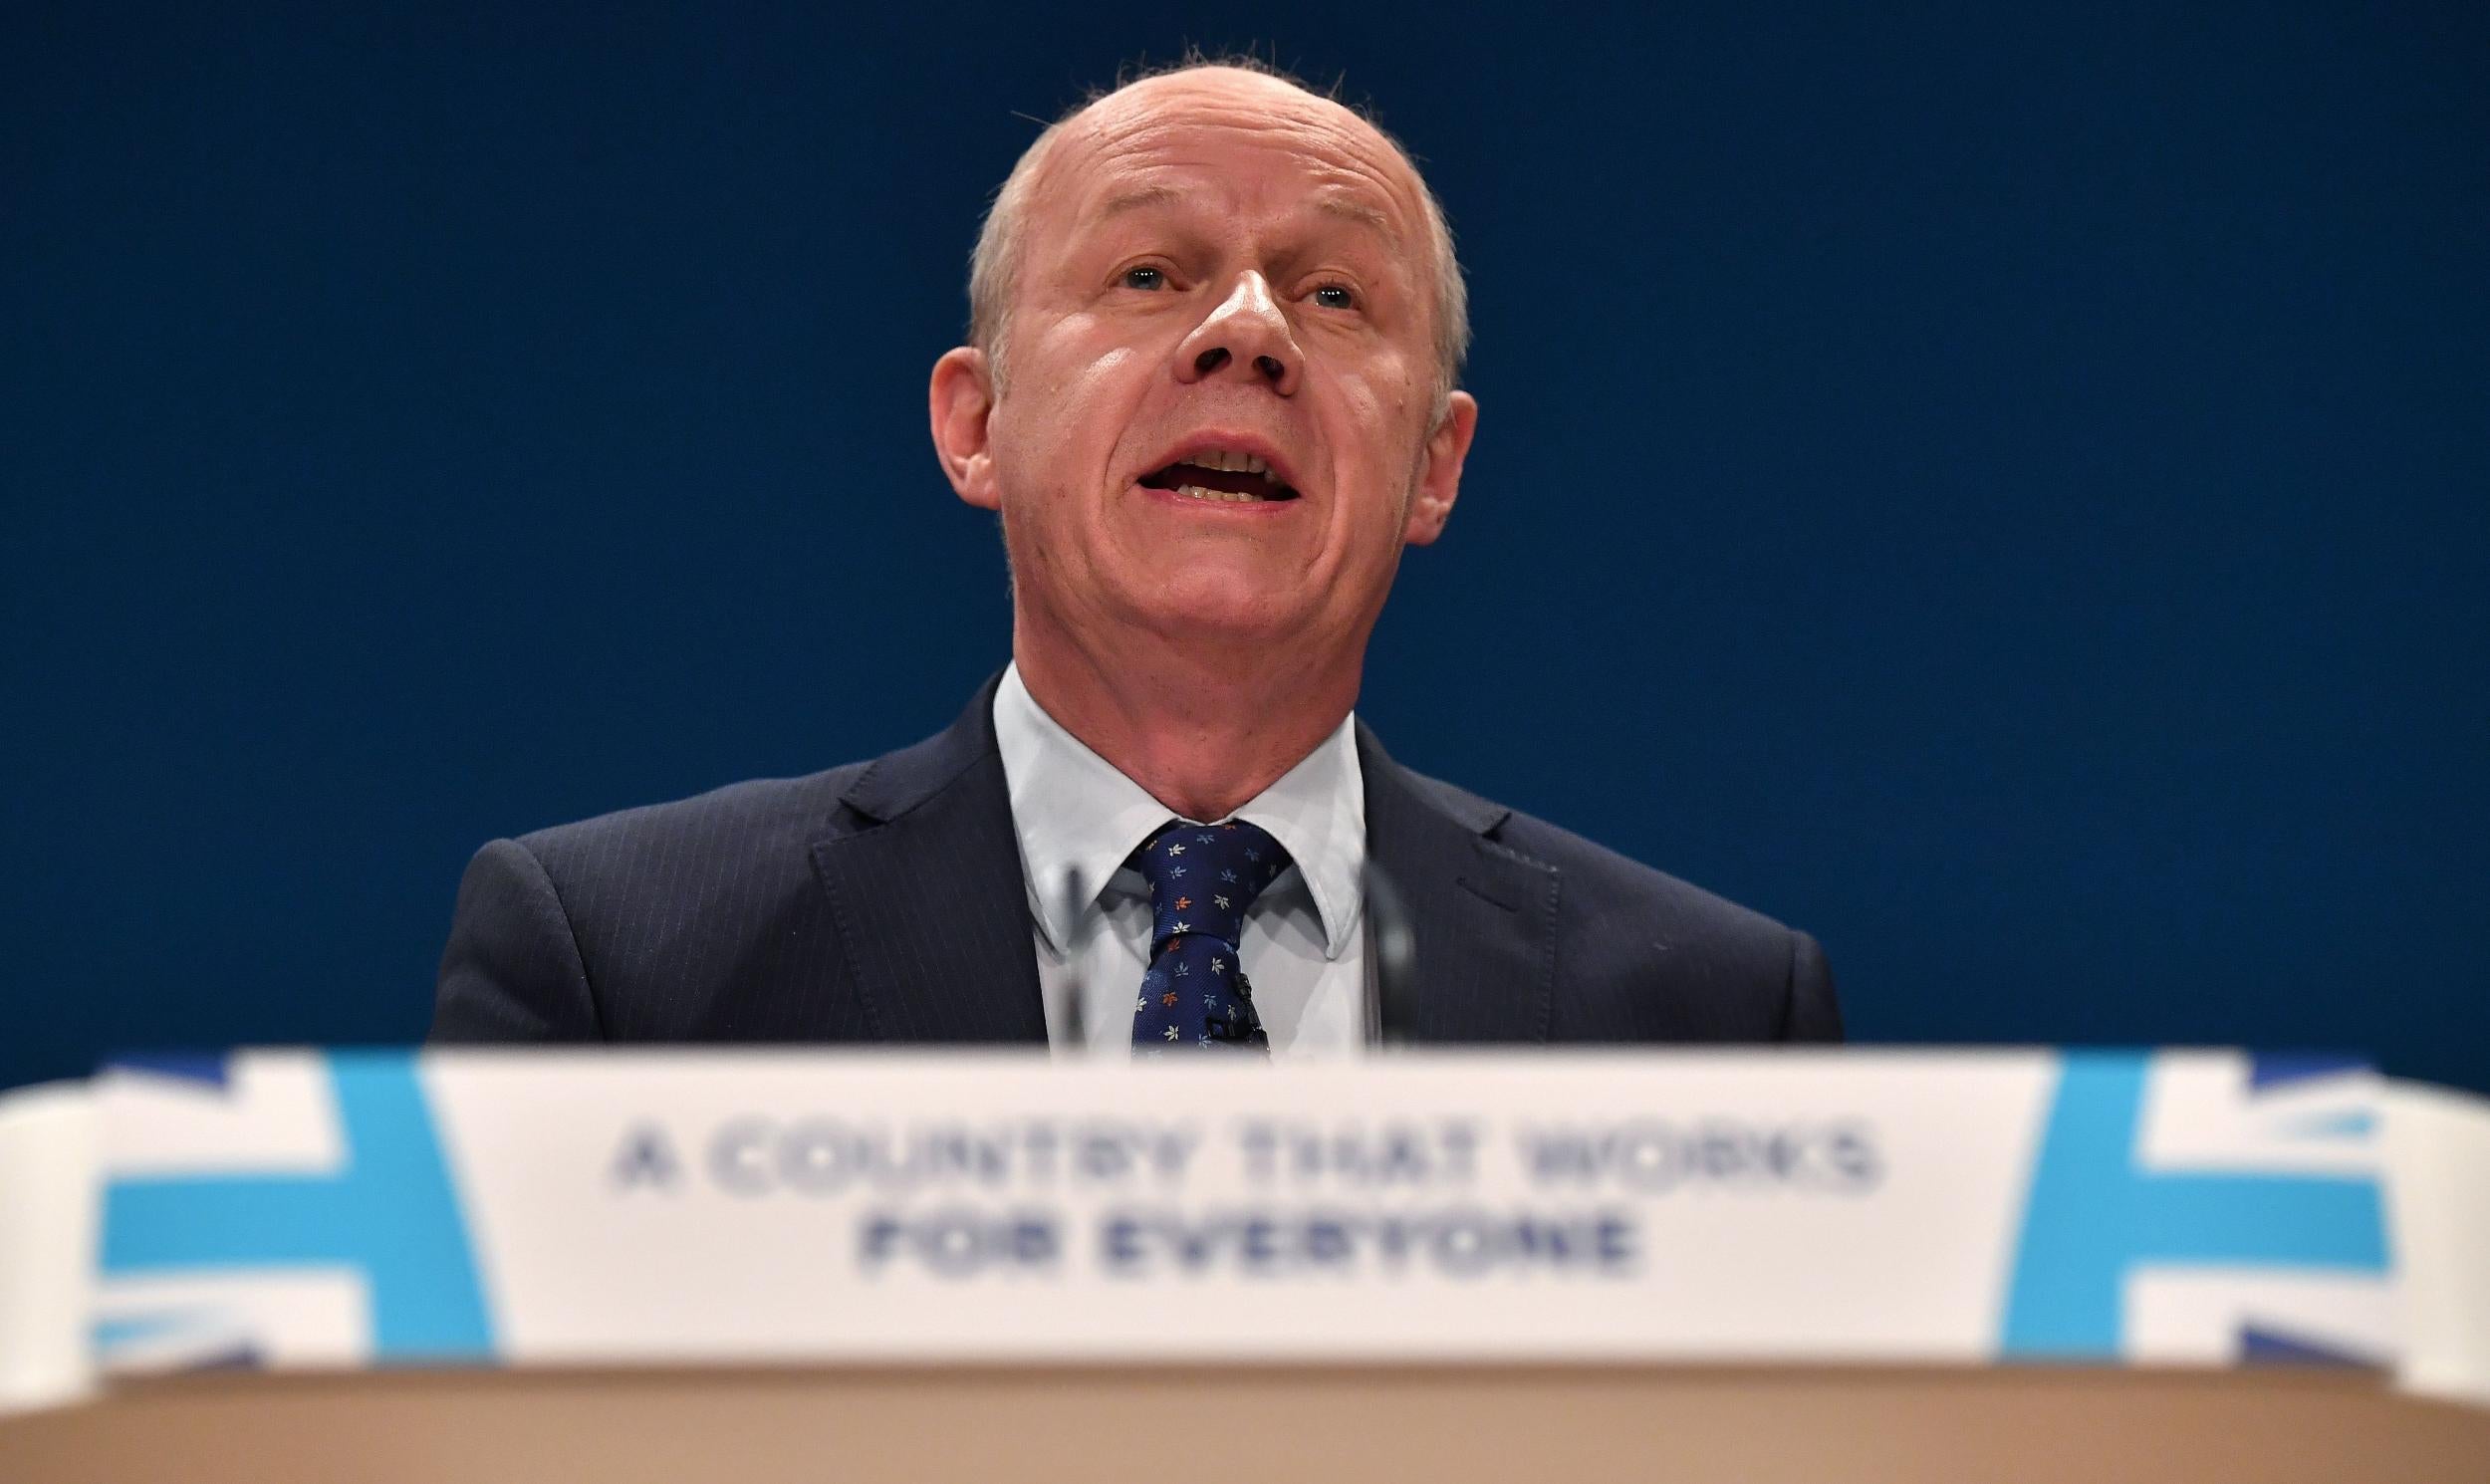 Damian Green at the Conservative party conference in Birmingham